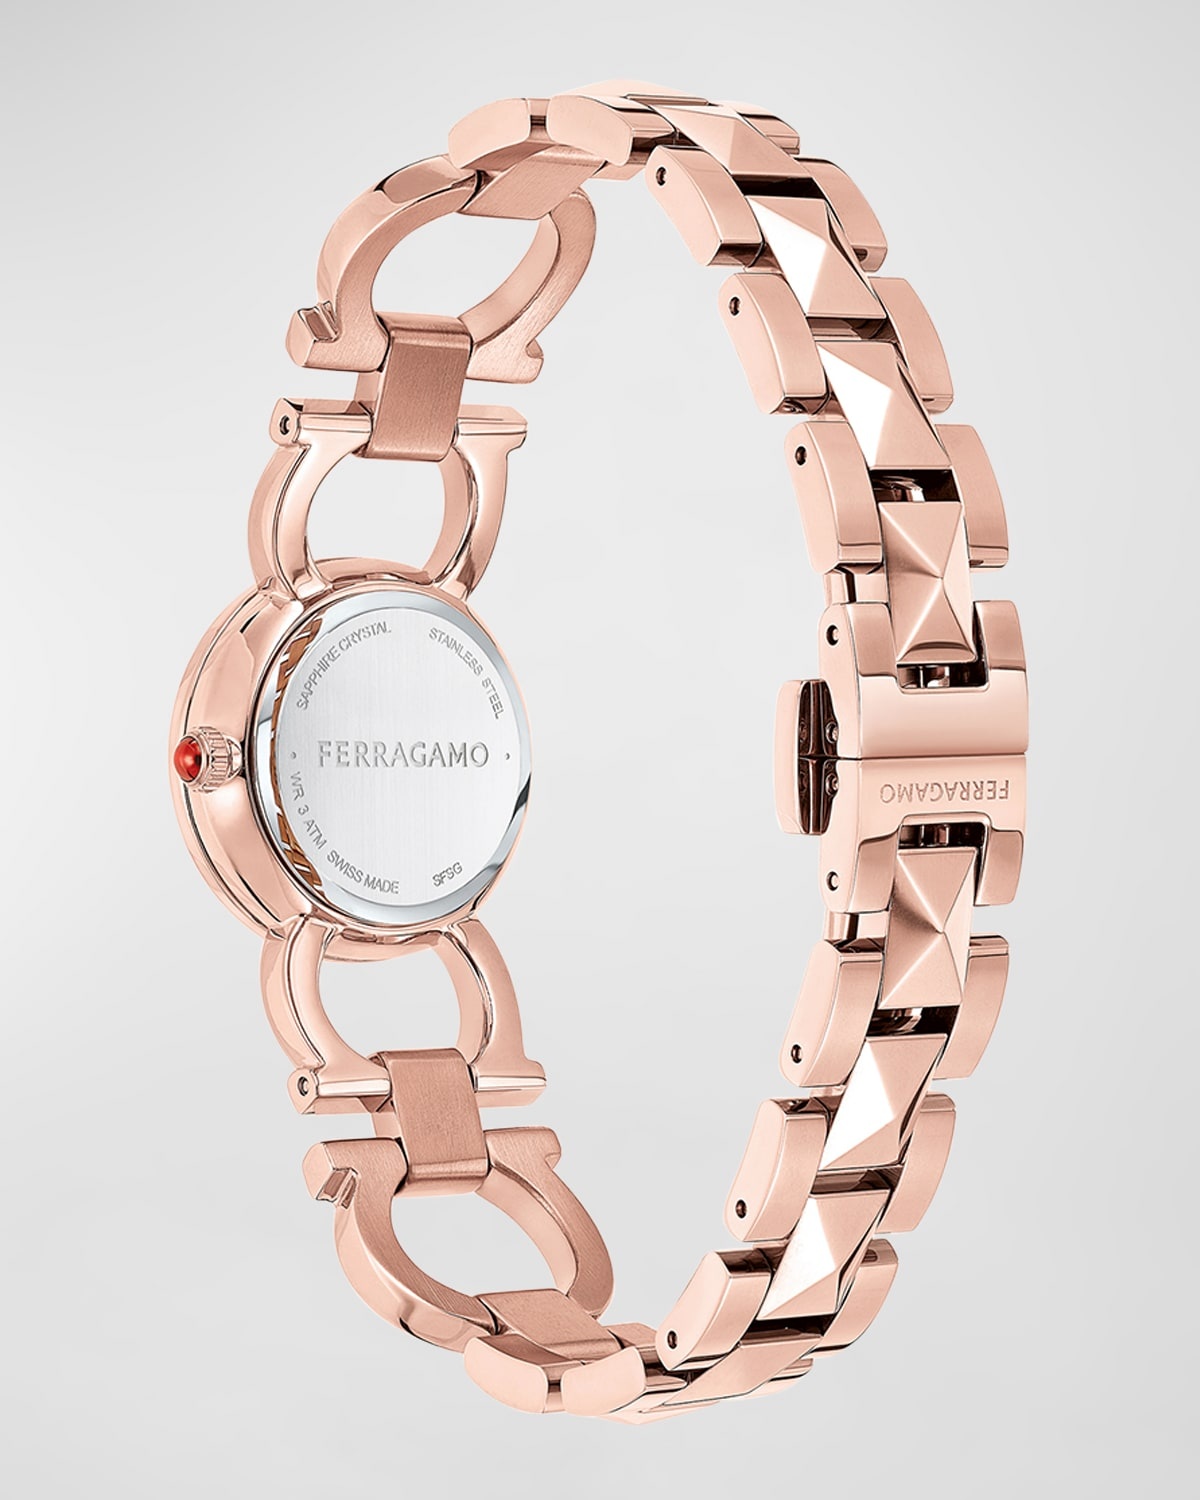 25mm Double Gancini Stud Watch with Silver Dial, Rose Gold - 3